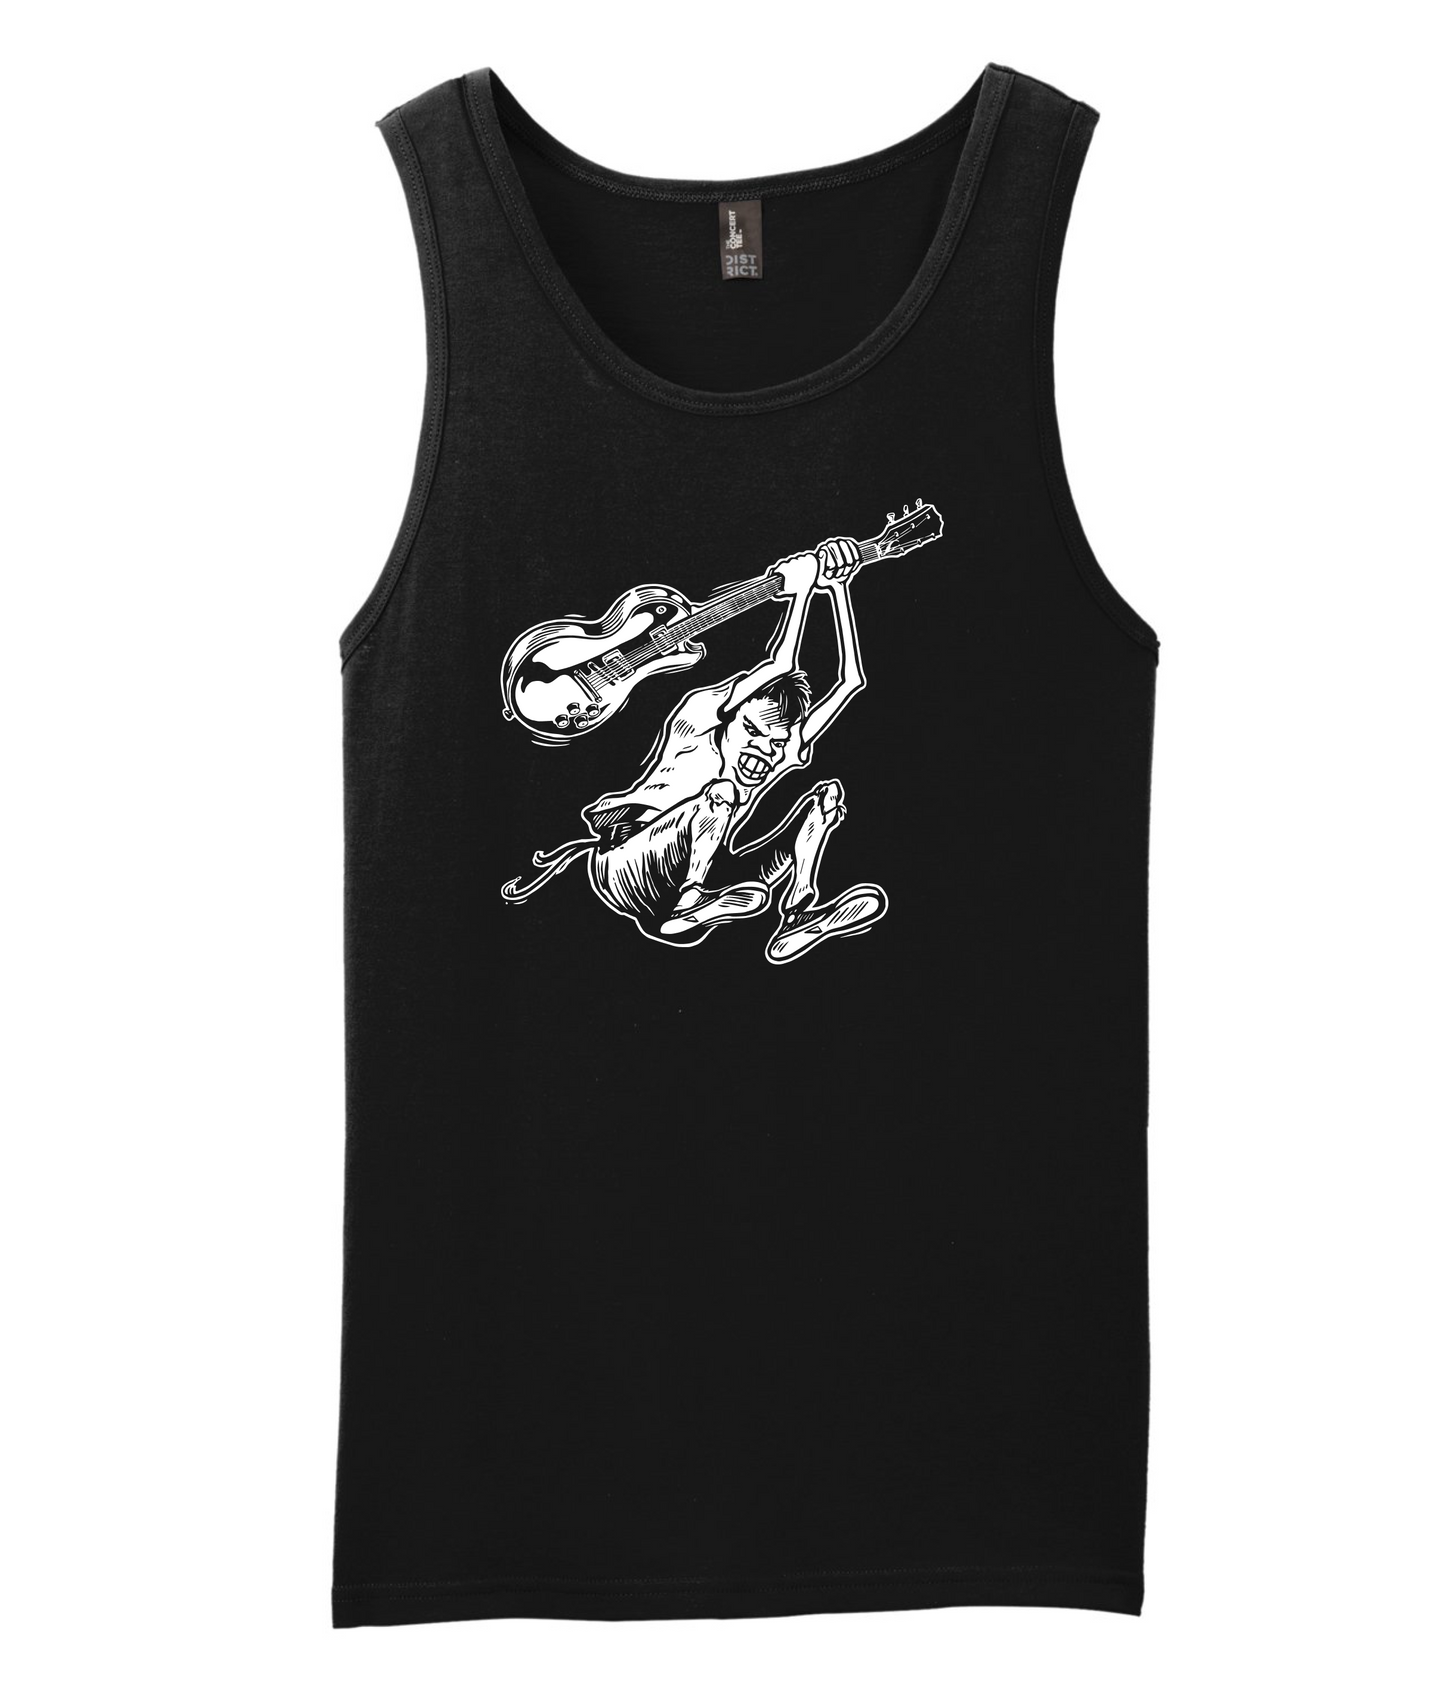 V-WOLTOP Tank Top 2